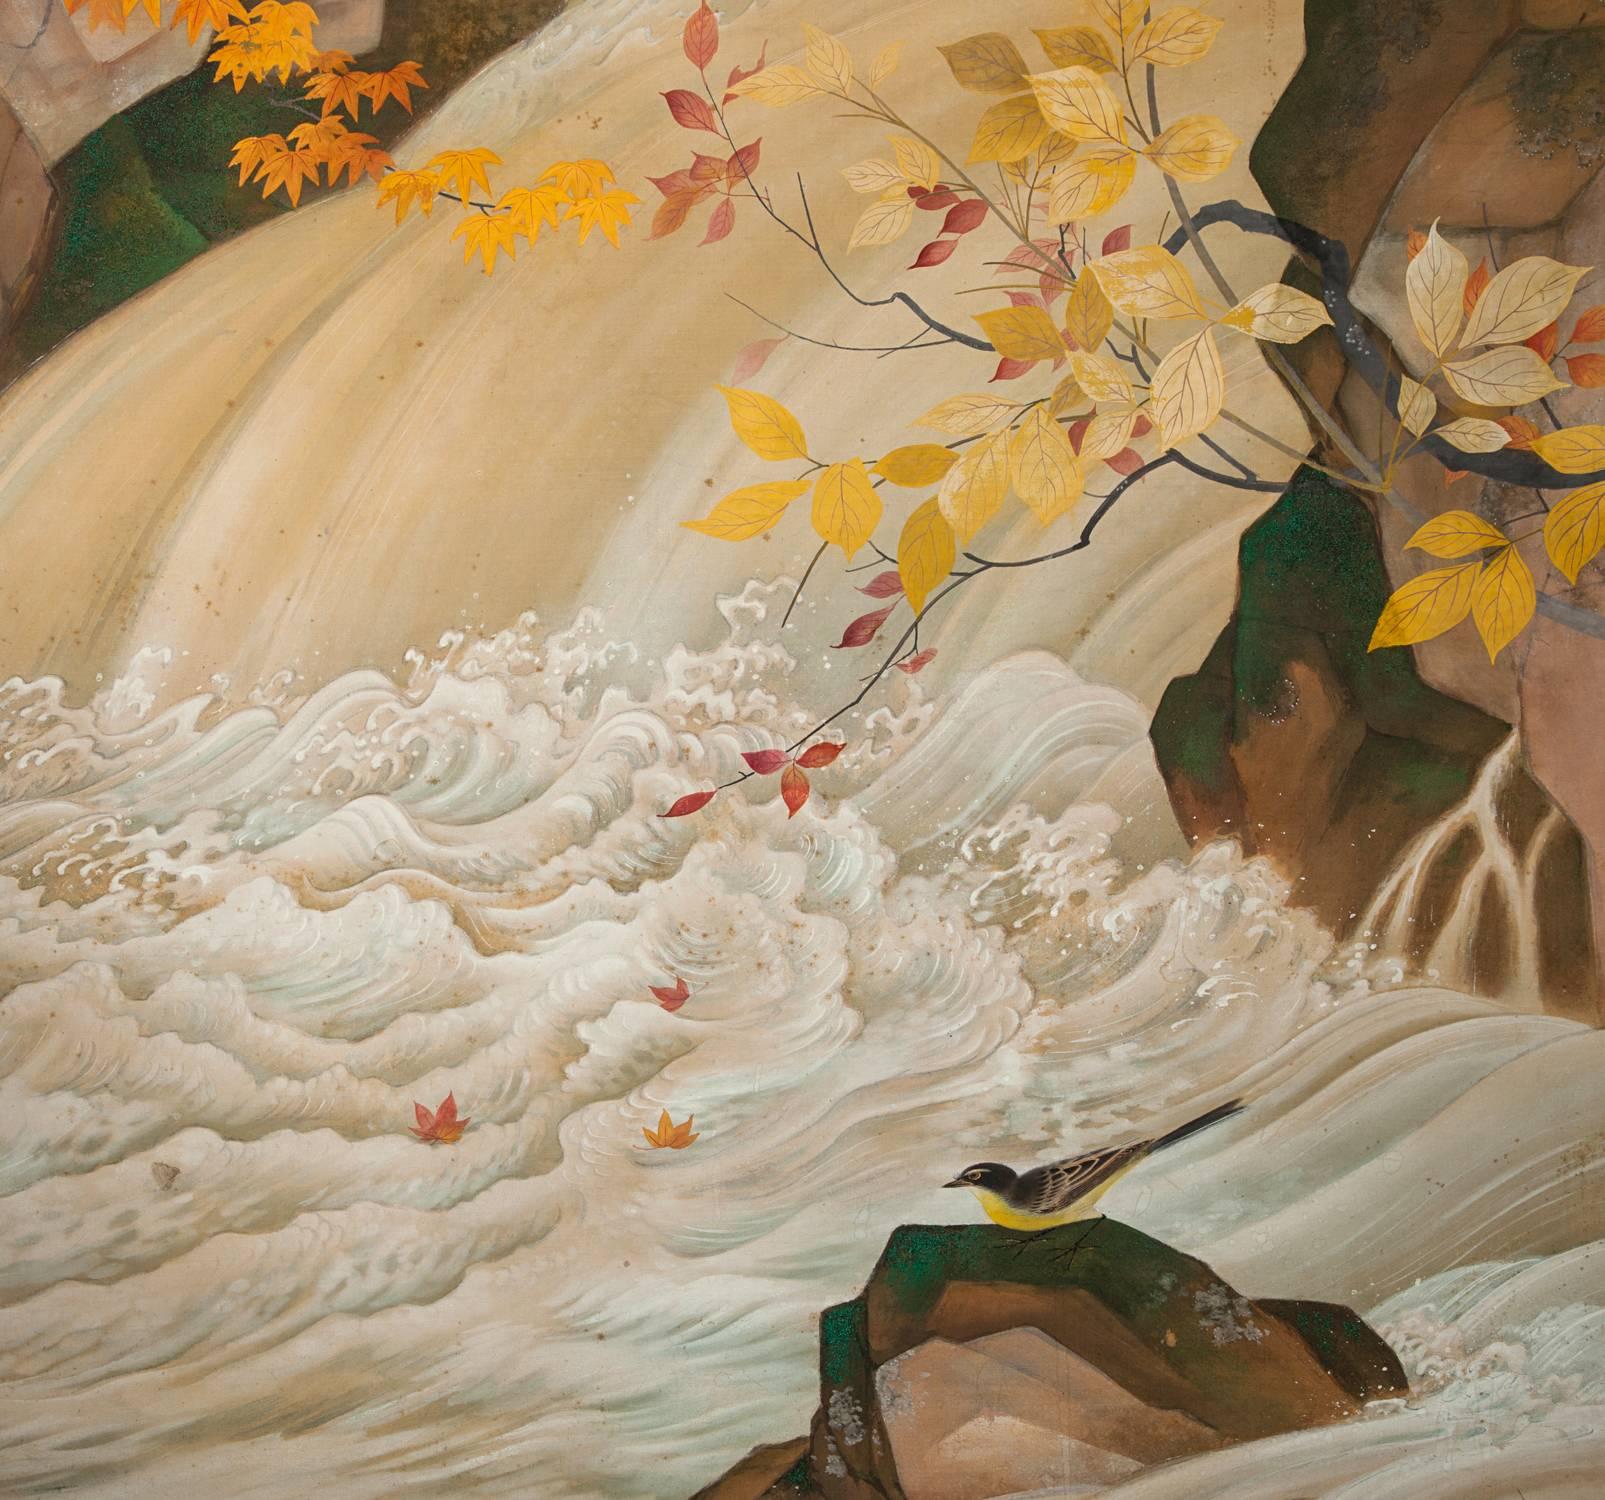 Japanese two-panel screen: Waterfall and maple tree in autumn scenery.
Taisho painting (1912-1926).
Mineral pigments on silk.
Artist signature reads: Kosetsu 67 3/4